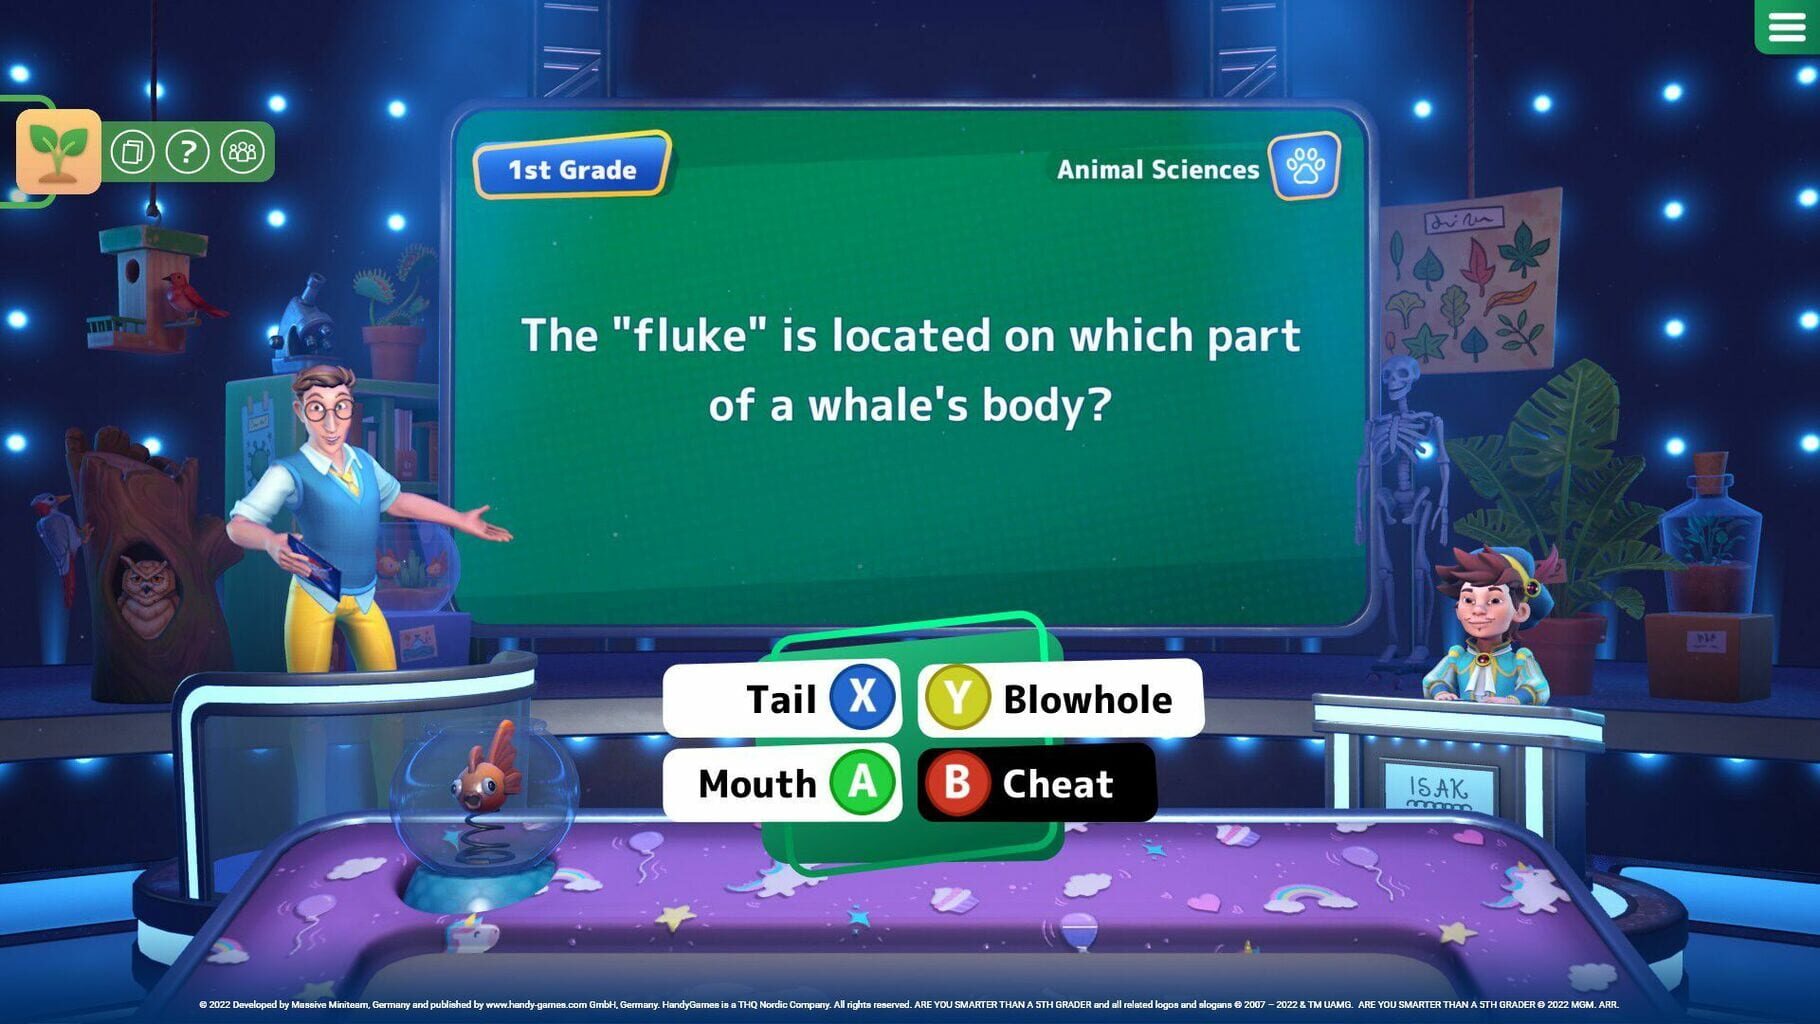 Are You Smarter than a 5th Grader? screenshot